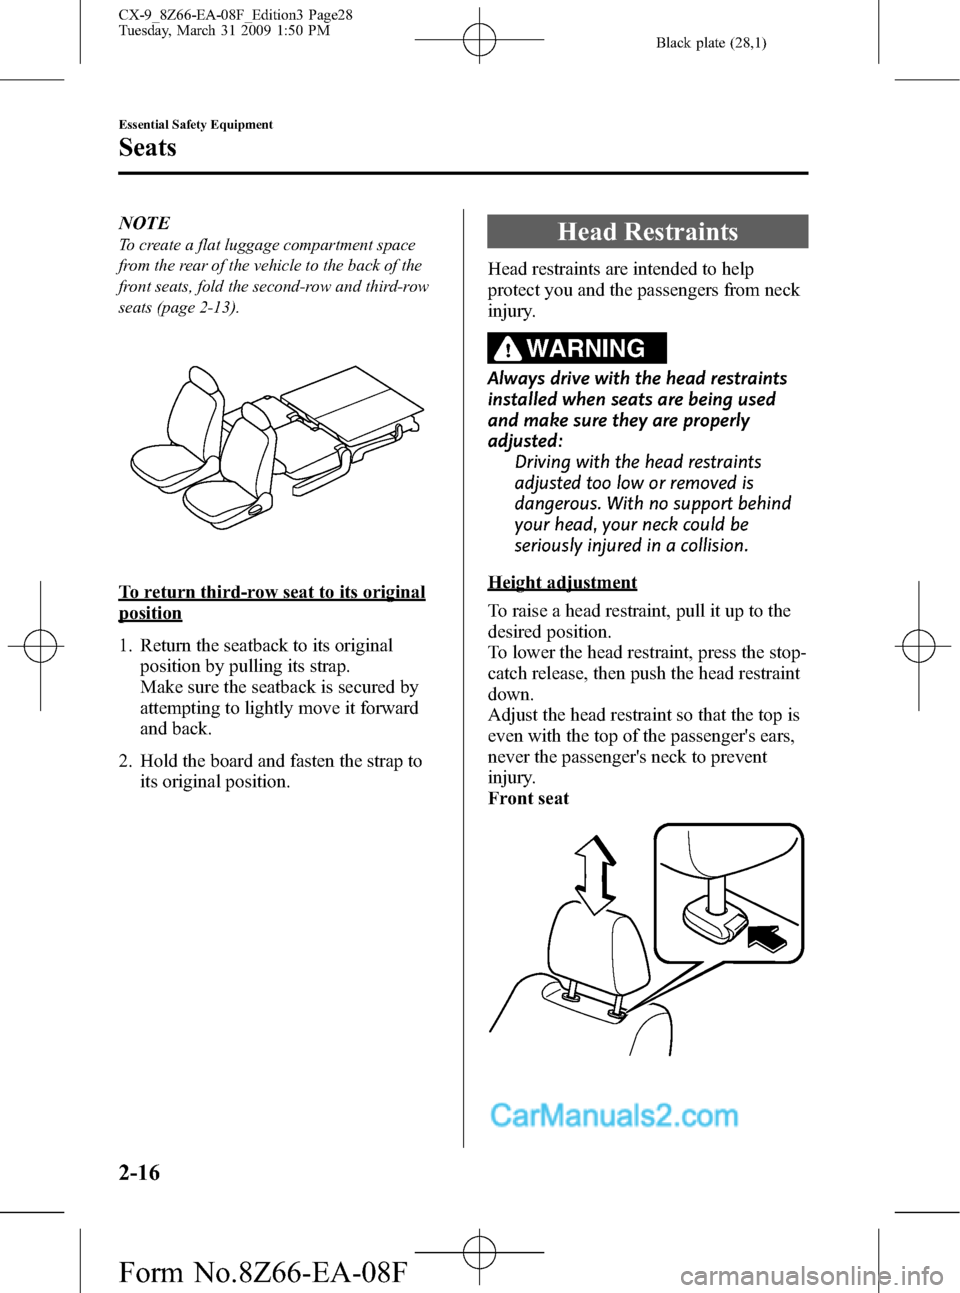 MAZDA MODEL CX-9 2009   (in English) Owners Manual Black plate (28,1)
NOTE
To create a flat luggage compartment space
from the rear of the vehicle to the back of the
front seats, fold the second-row and third-row
seats (page 2-13).
To return third-row